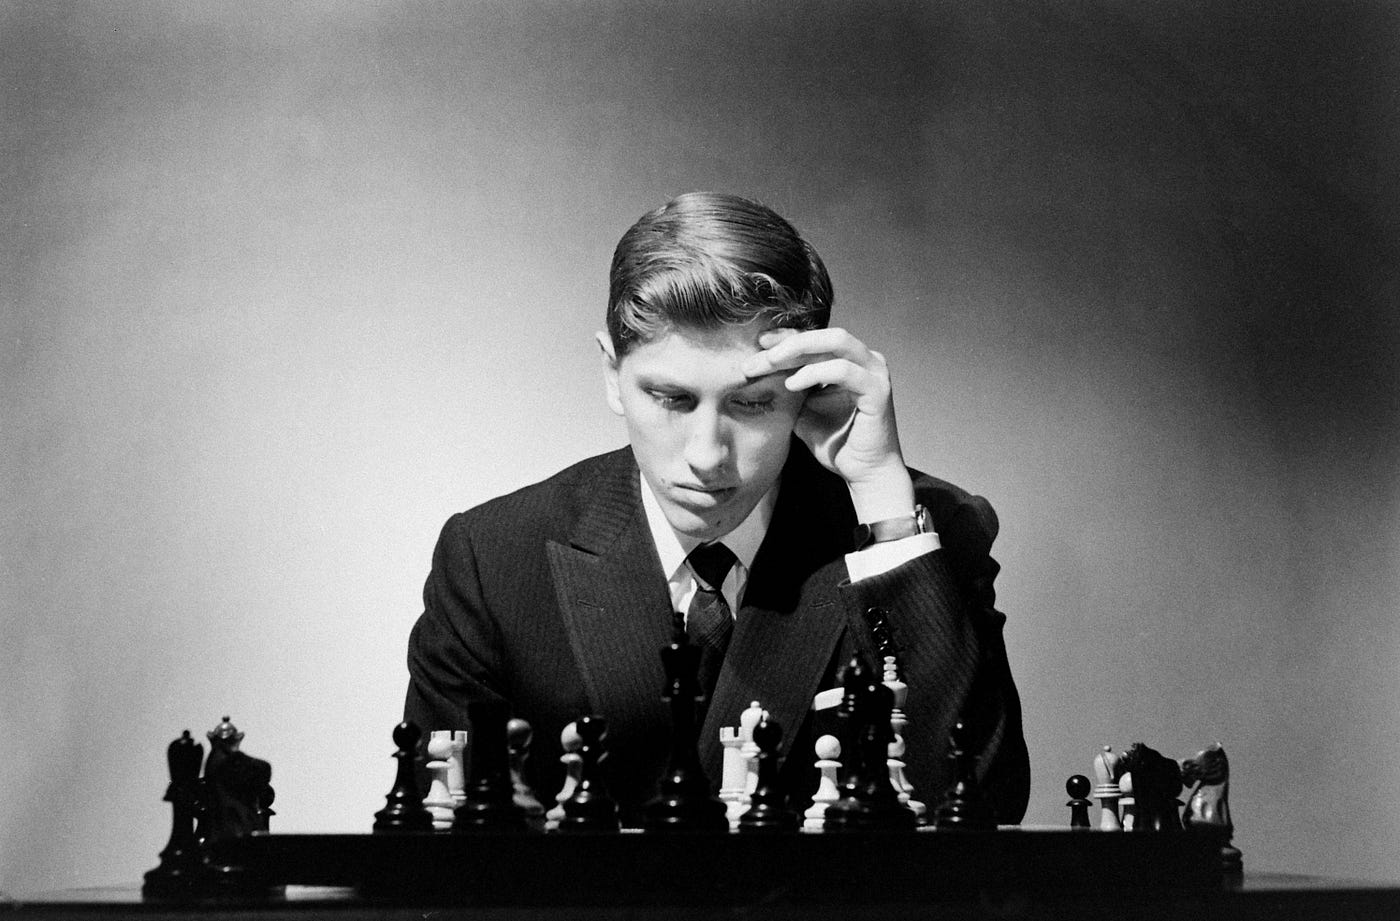 Chess.com - What do you think of Fischer's famous quote?